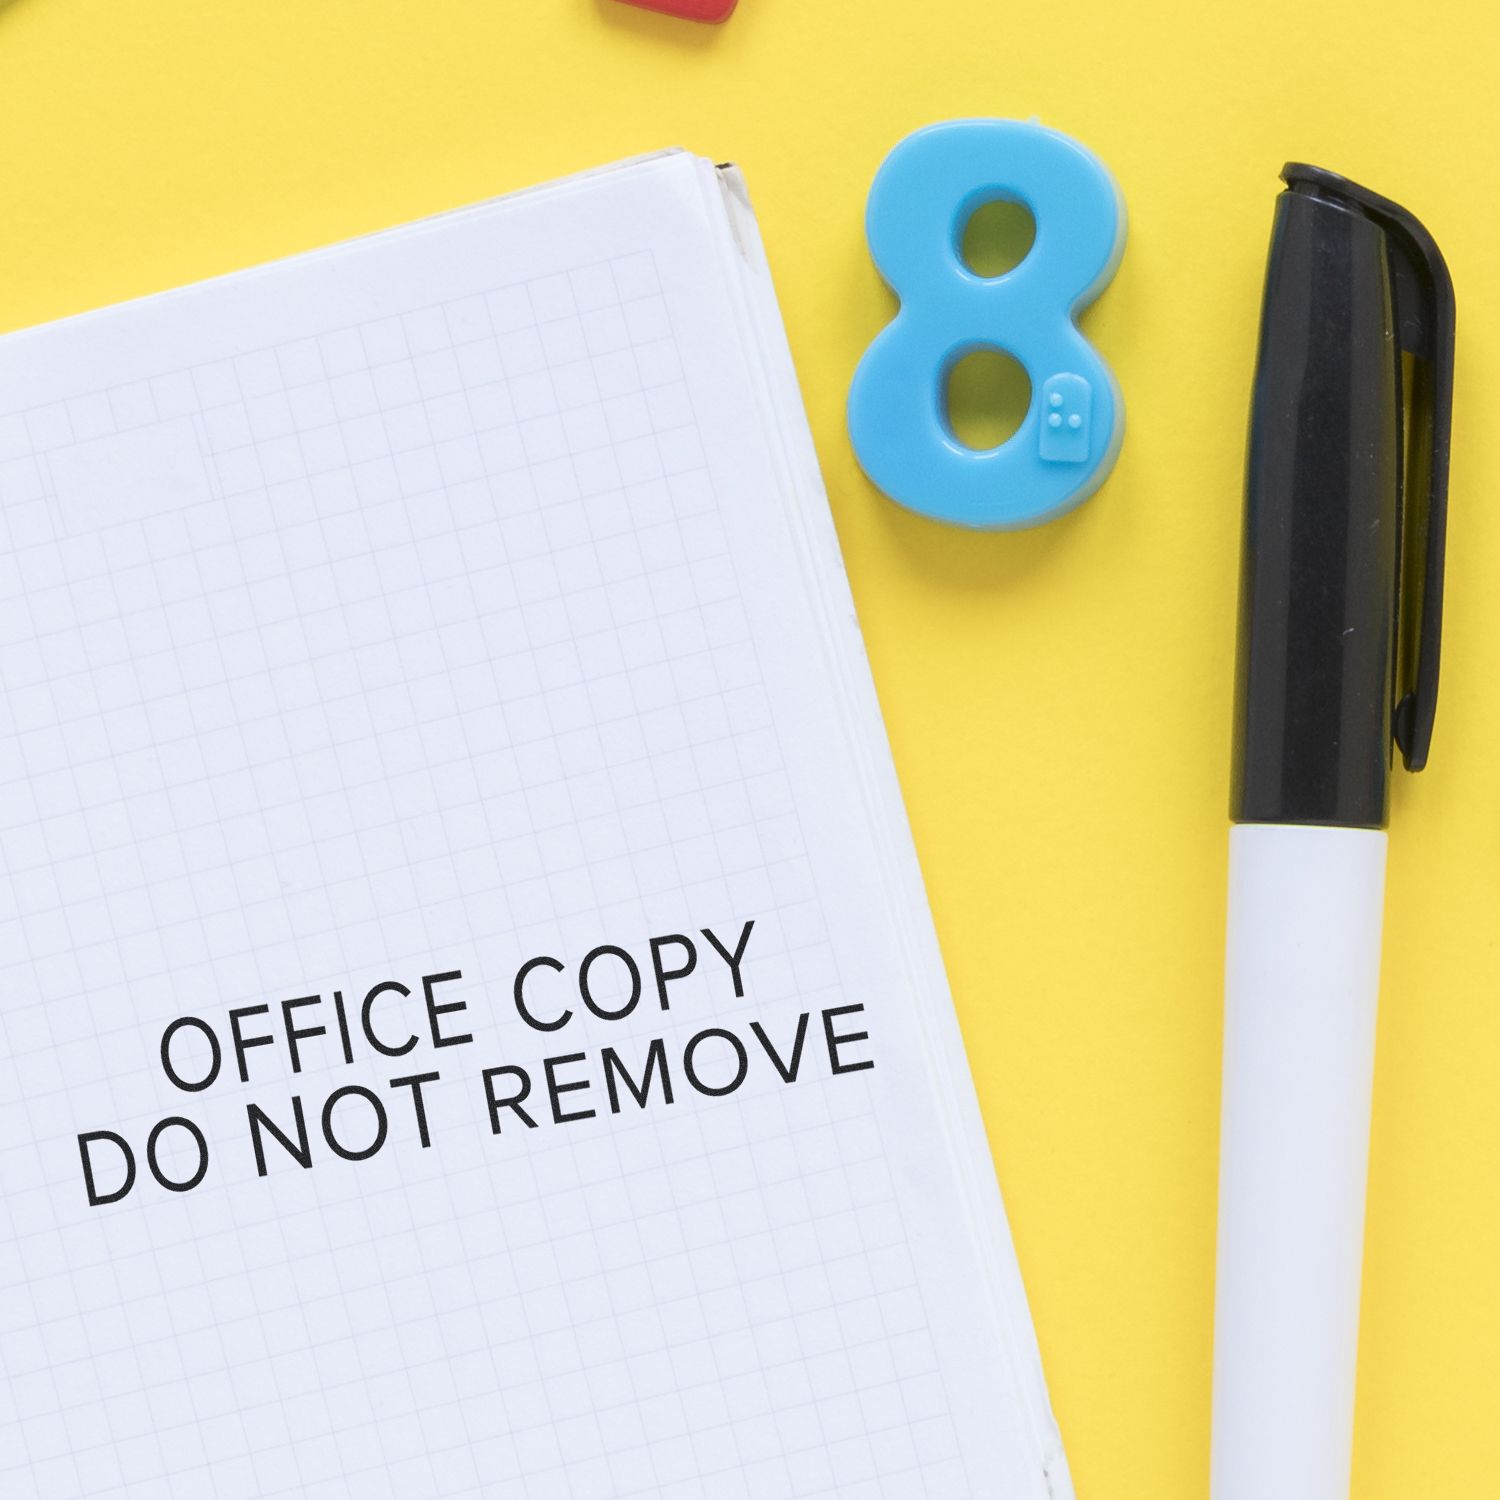 Large Pre-Inked Narrow Font Office Copy Do Not Remove Stamp Lifestyle Photo